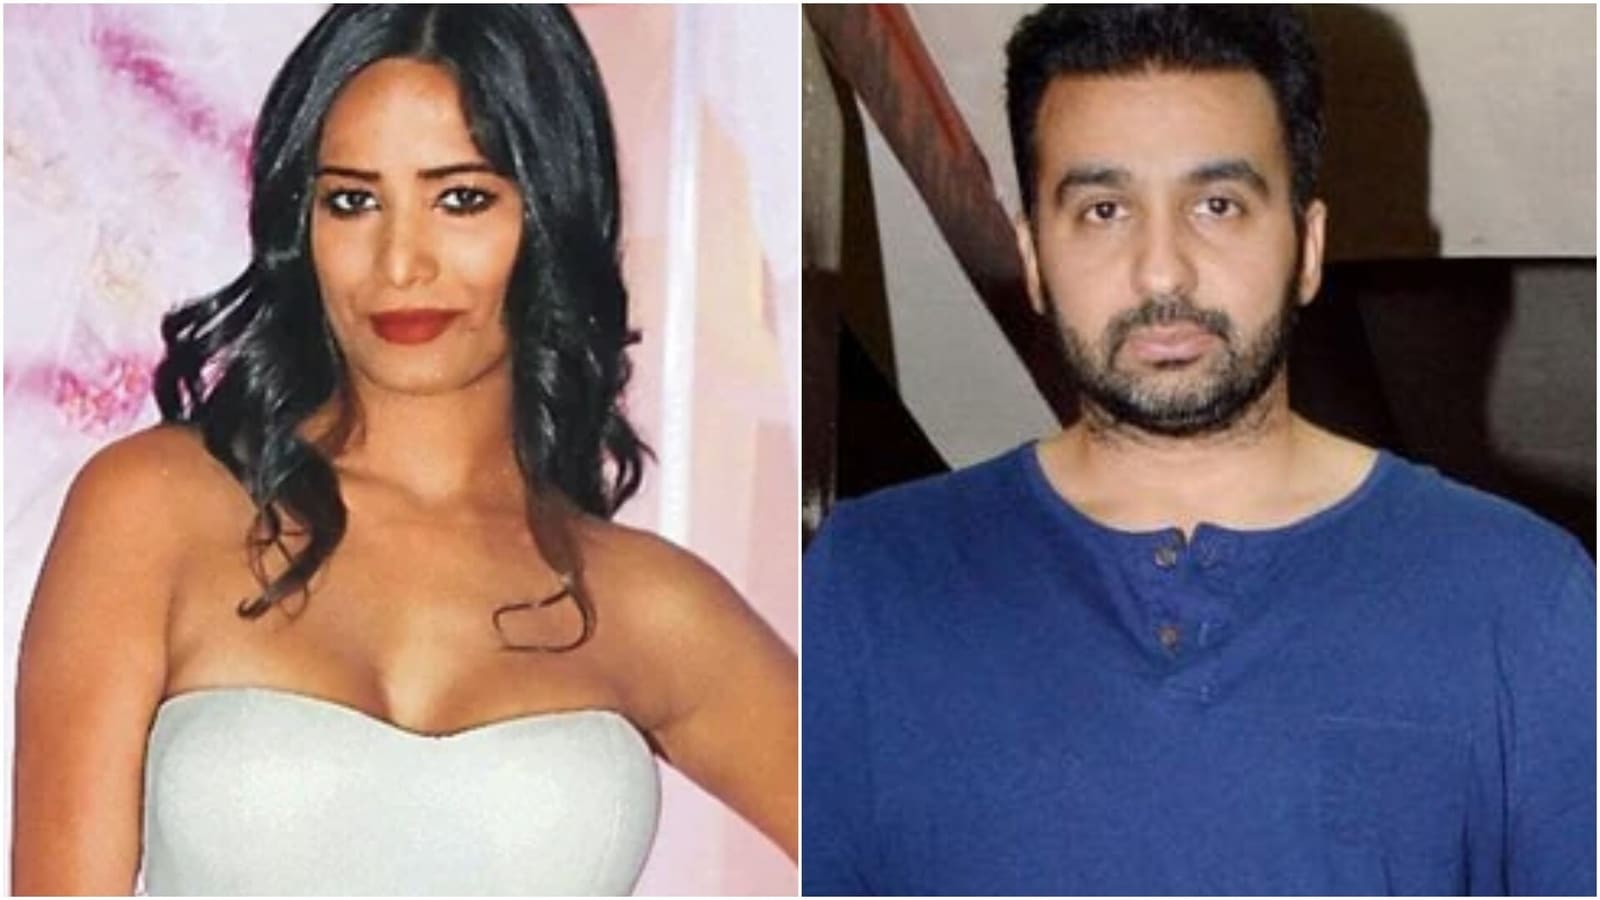 Sex Poonam Rauj Xxxx H D - Poonam Pandey says working with Raj Kundra was the 'biggest mistake' of her  life: 'These guys cheat people' | Bollywood - Hindustan Times